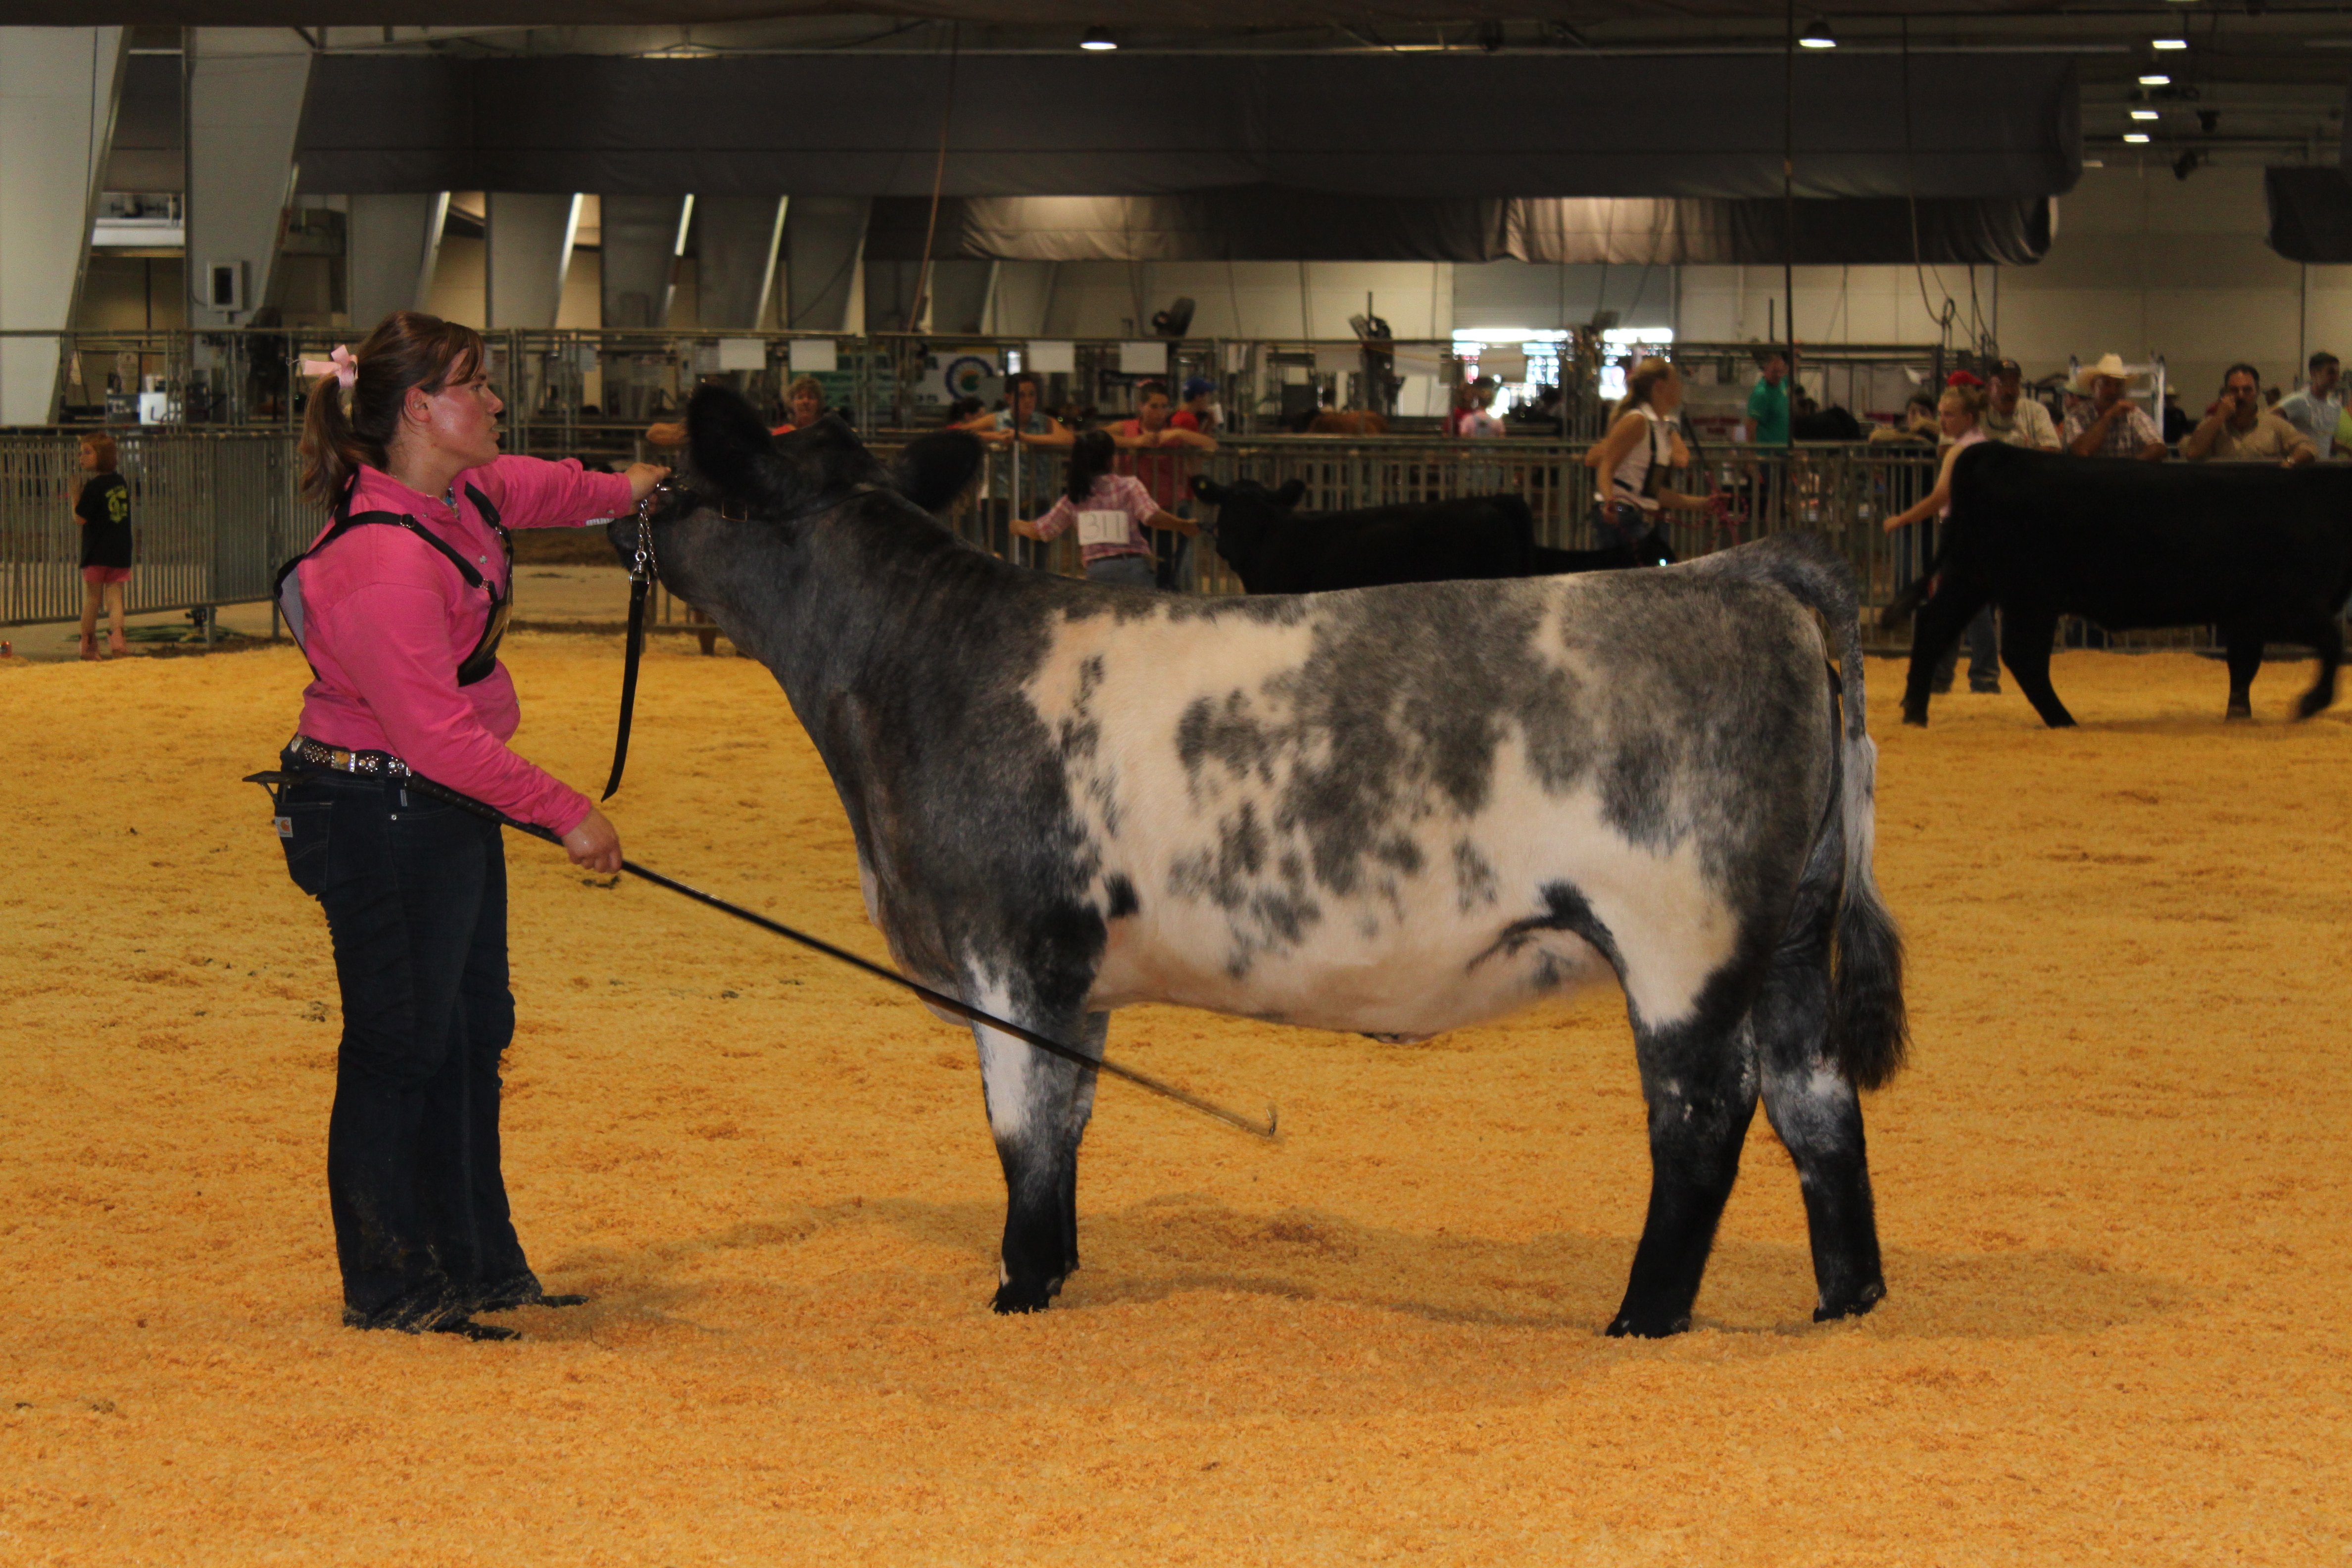 A girl poses a cow in an arena.